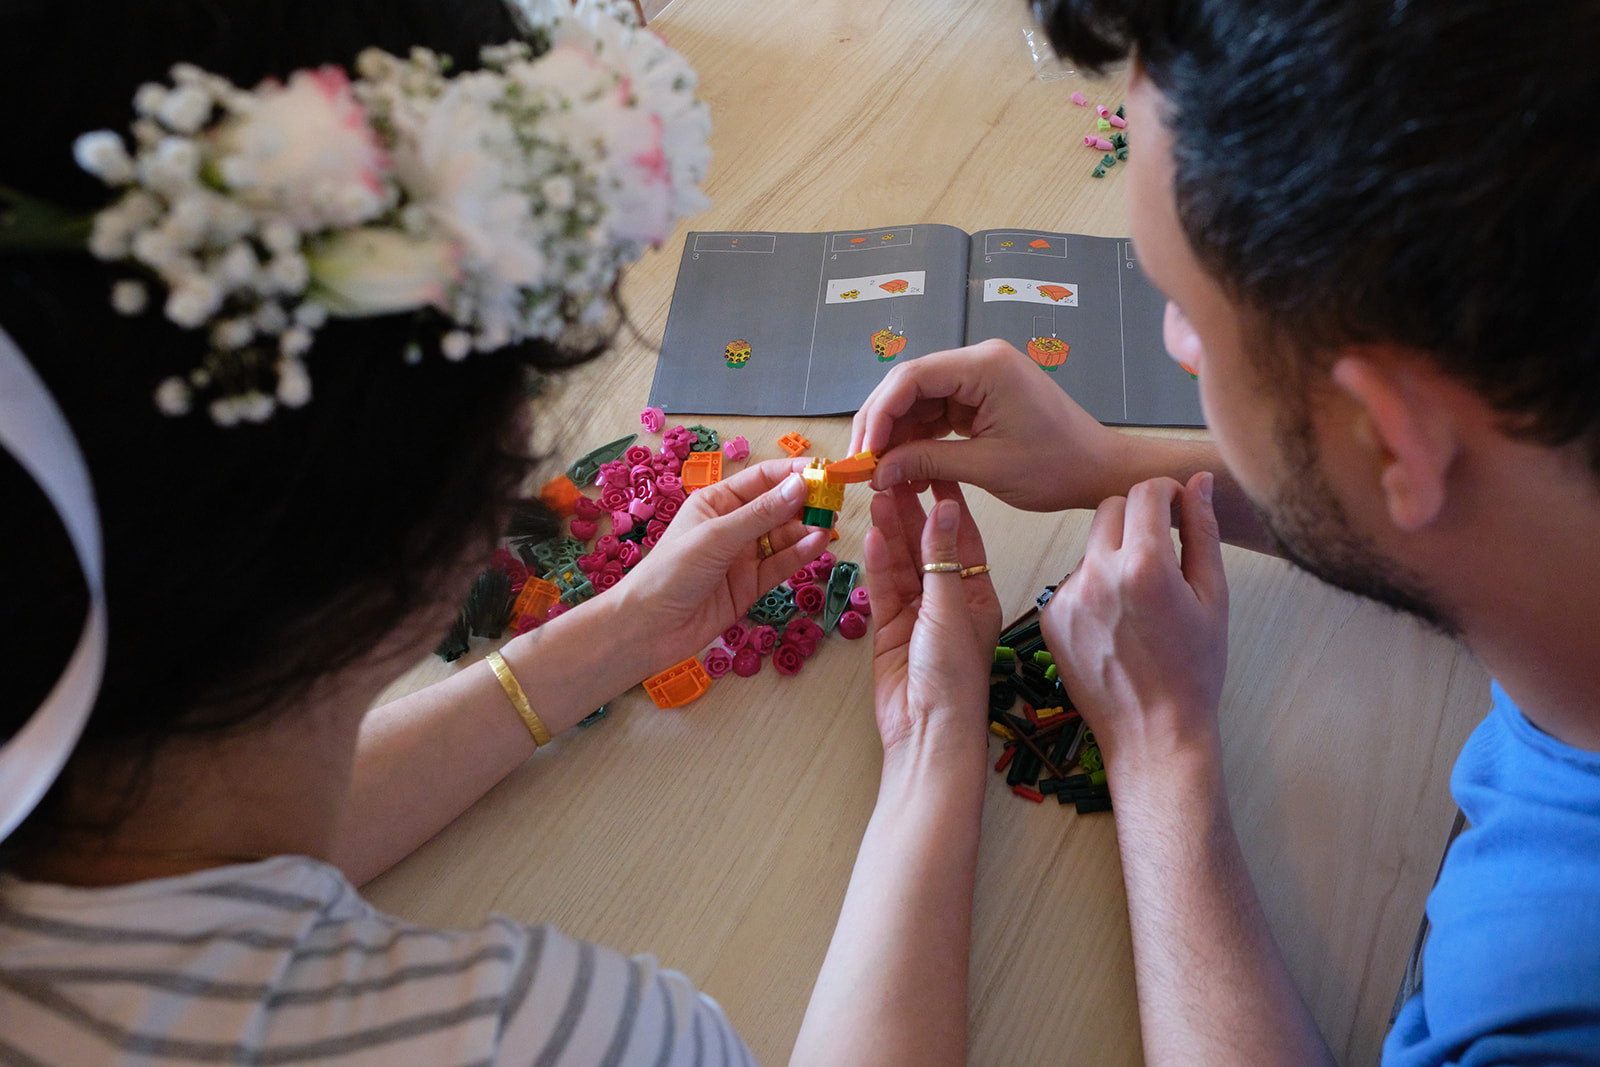 engaged couple building lego flowers together with flowers in her hair